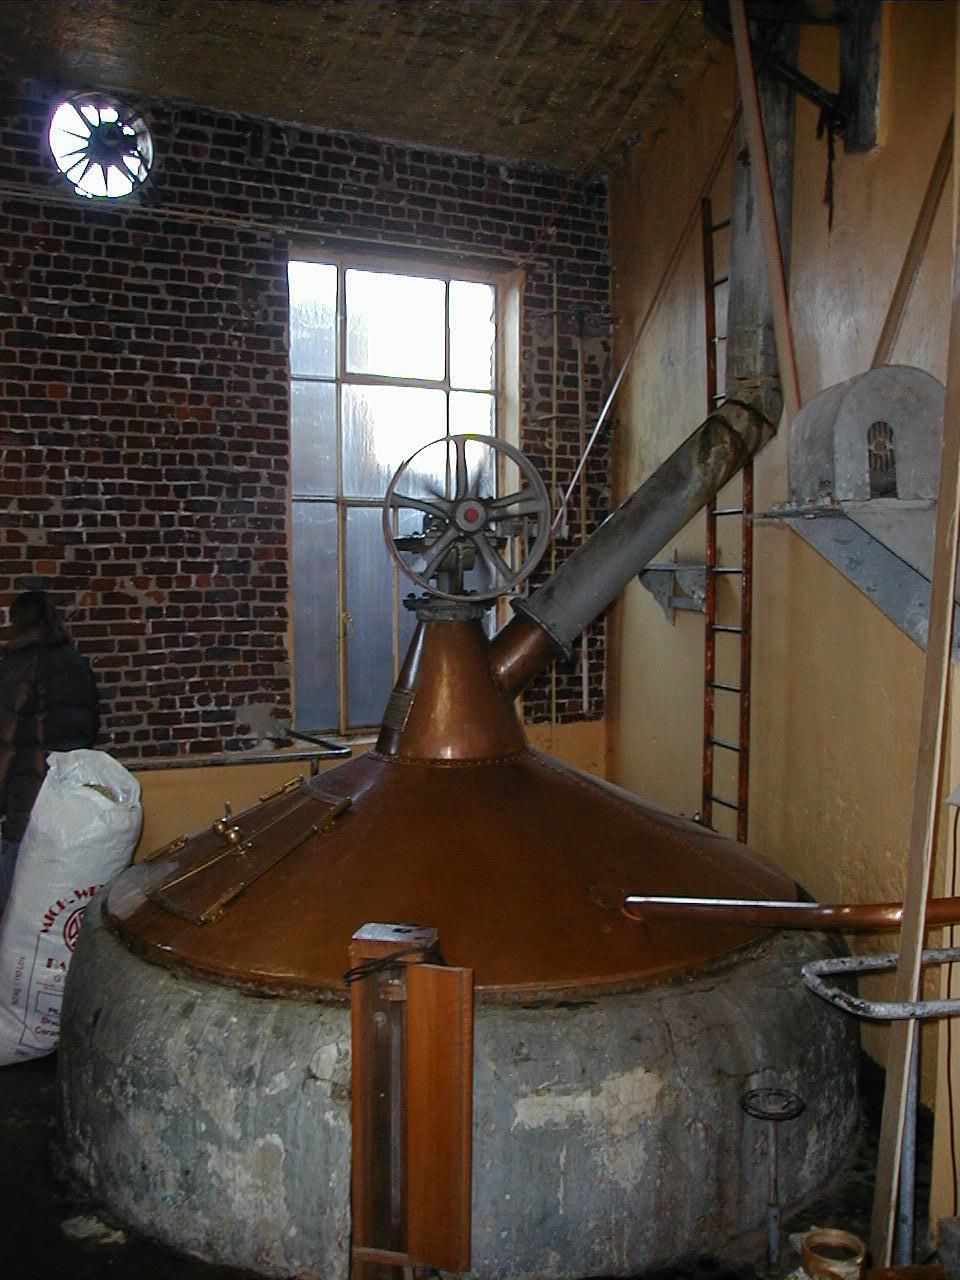 Brew kettle at Cantillon brewery, Brussels. My own photo.